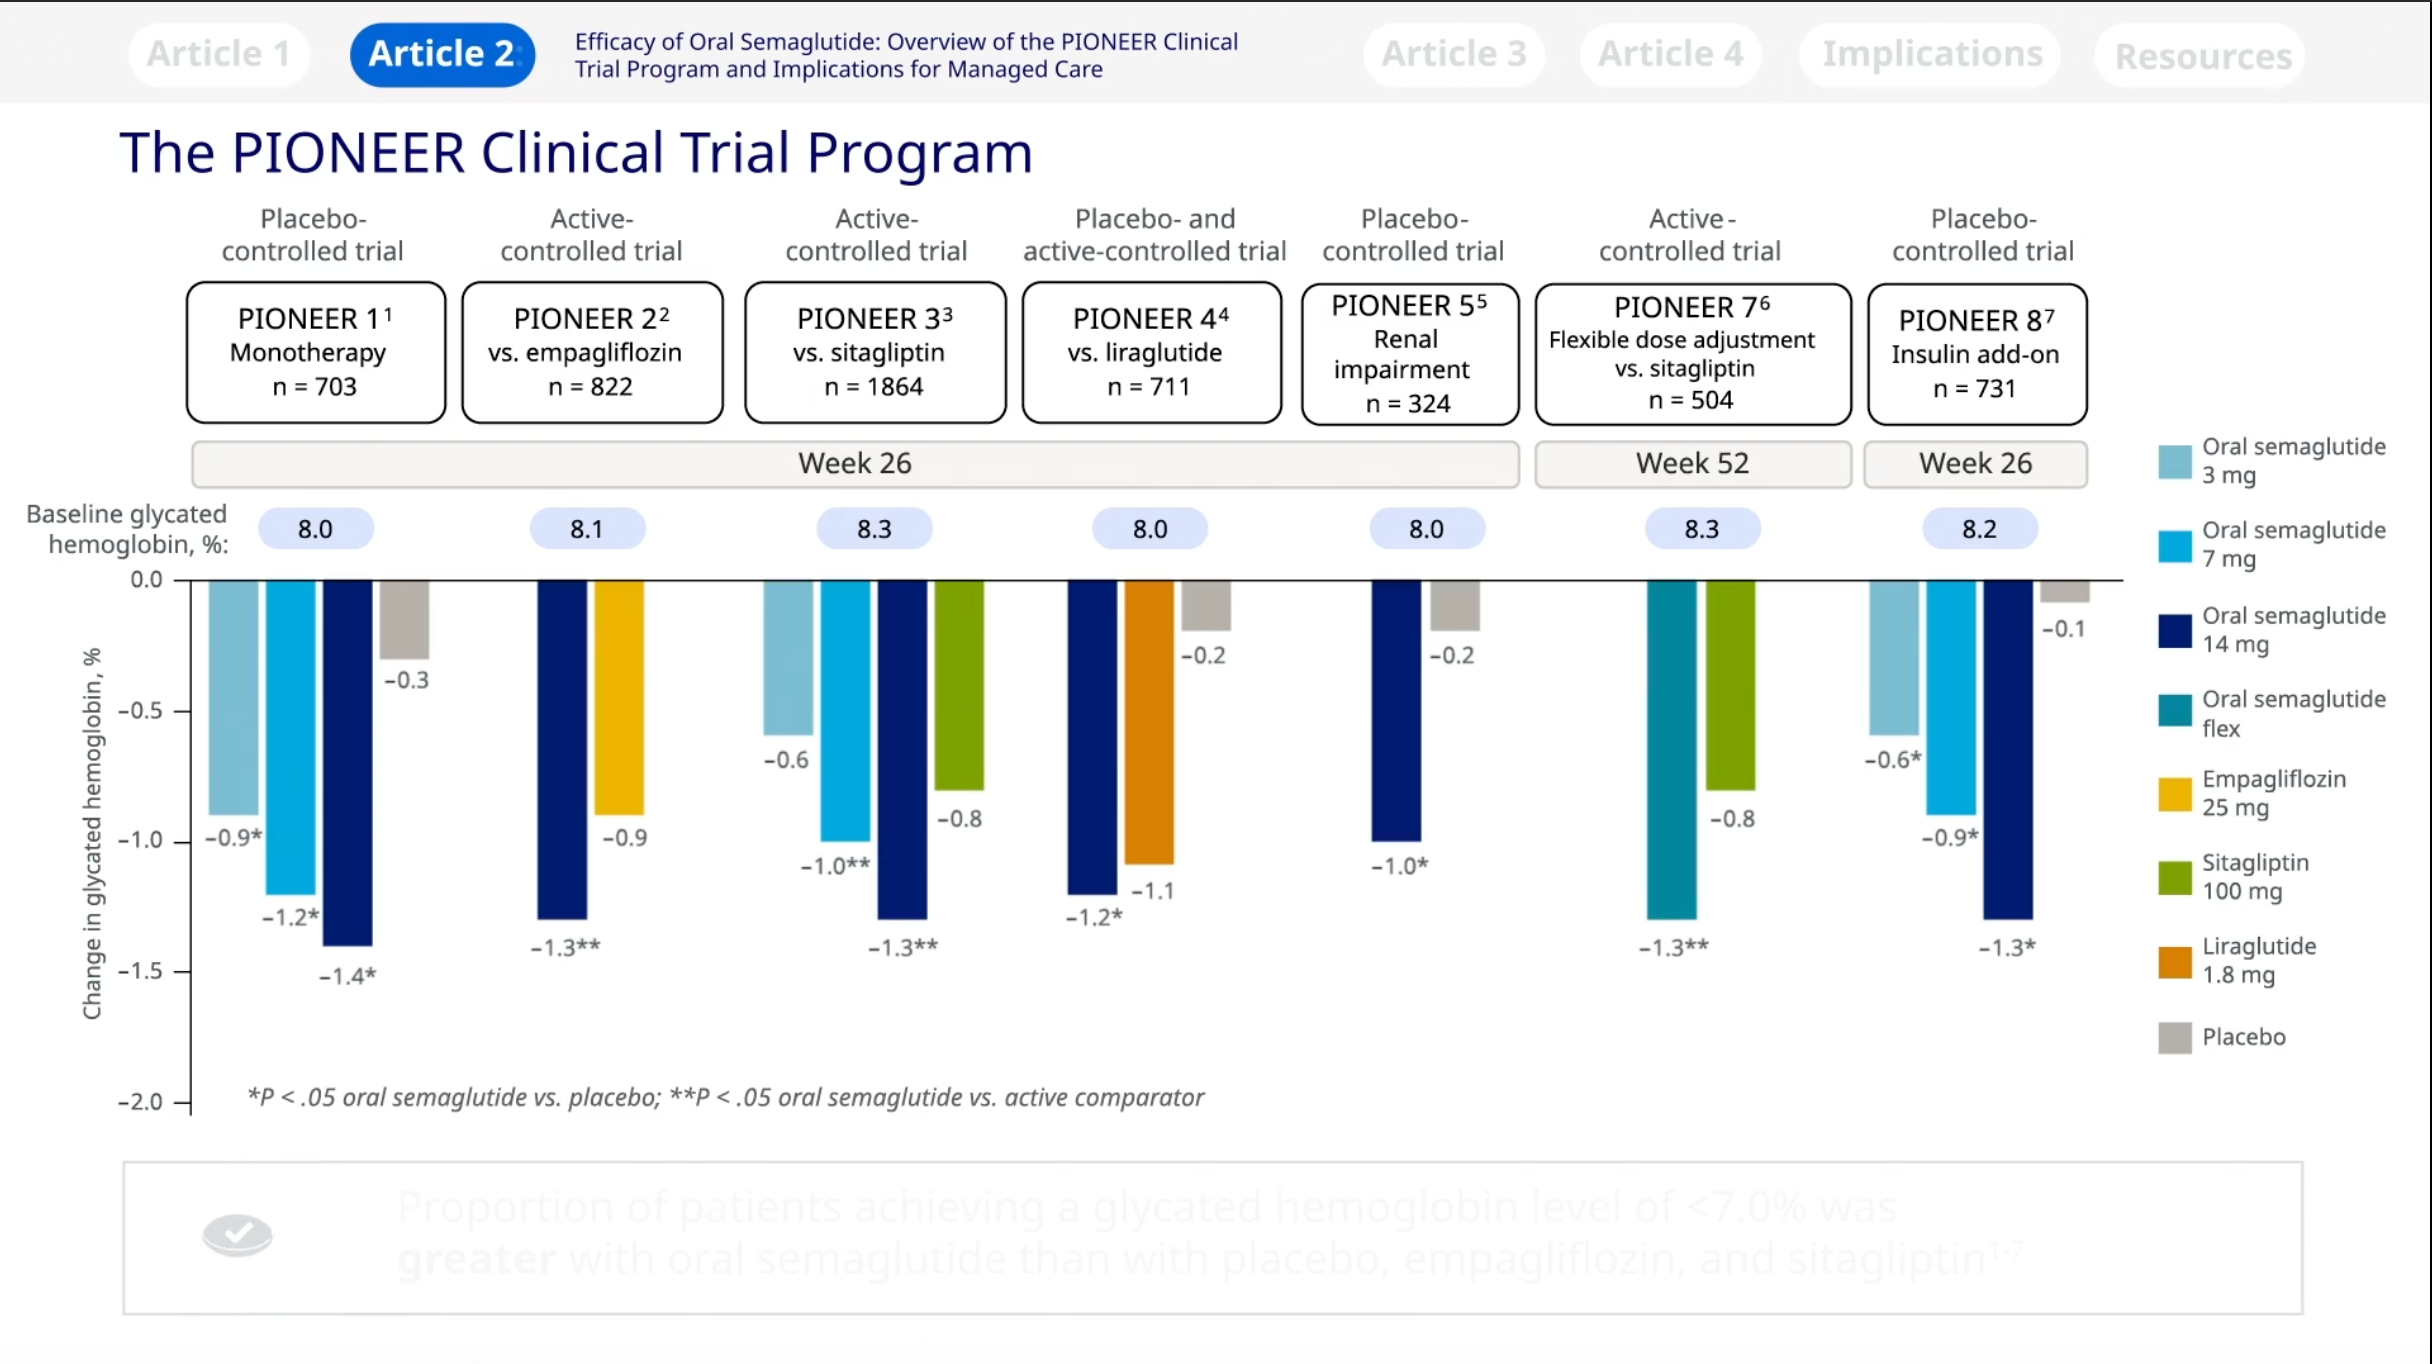 Overview of the PIONEER Clinical Trial Program for Oral Semaglutide